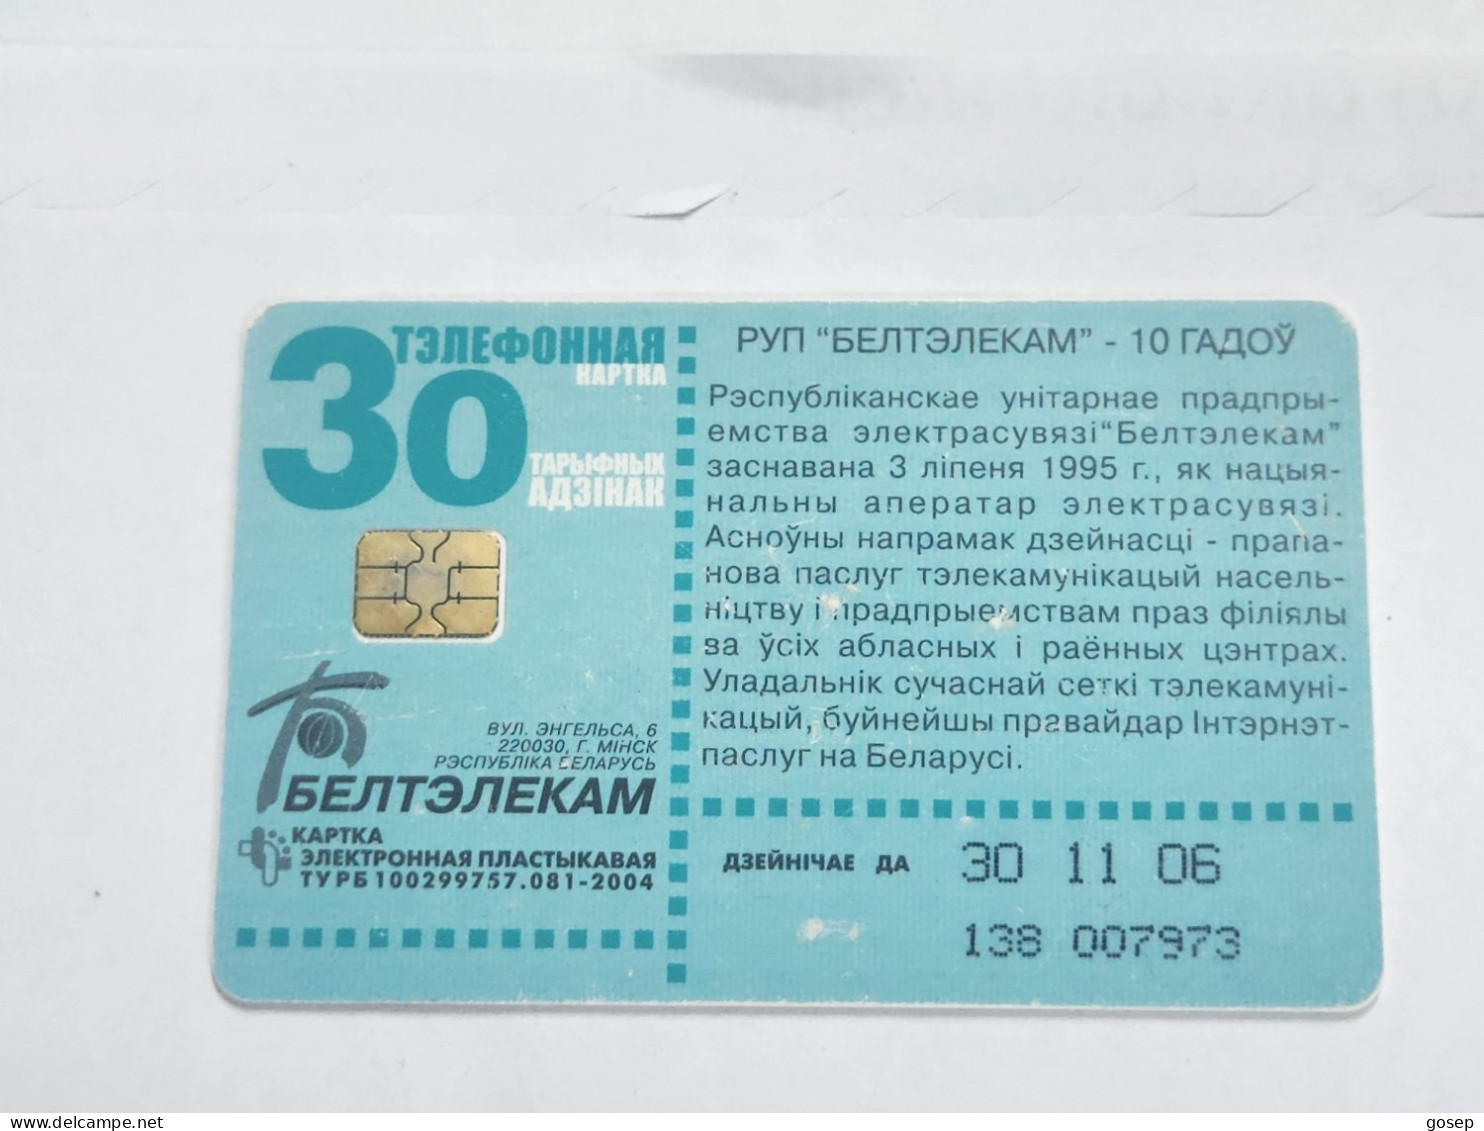 BELARUS-(BY-BLT-138a)-10th Anniversary-(117)(GOLD CHIP)(007973)(tirage-335.000)used Card+1card Prepiad Free - Bielorussia